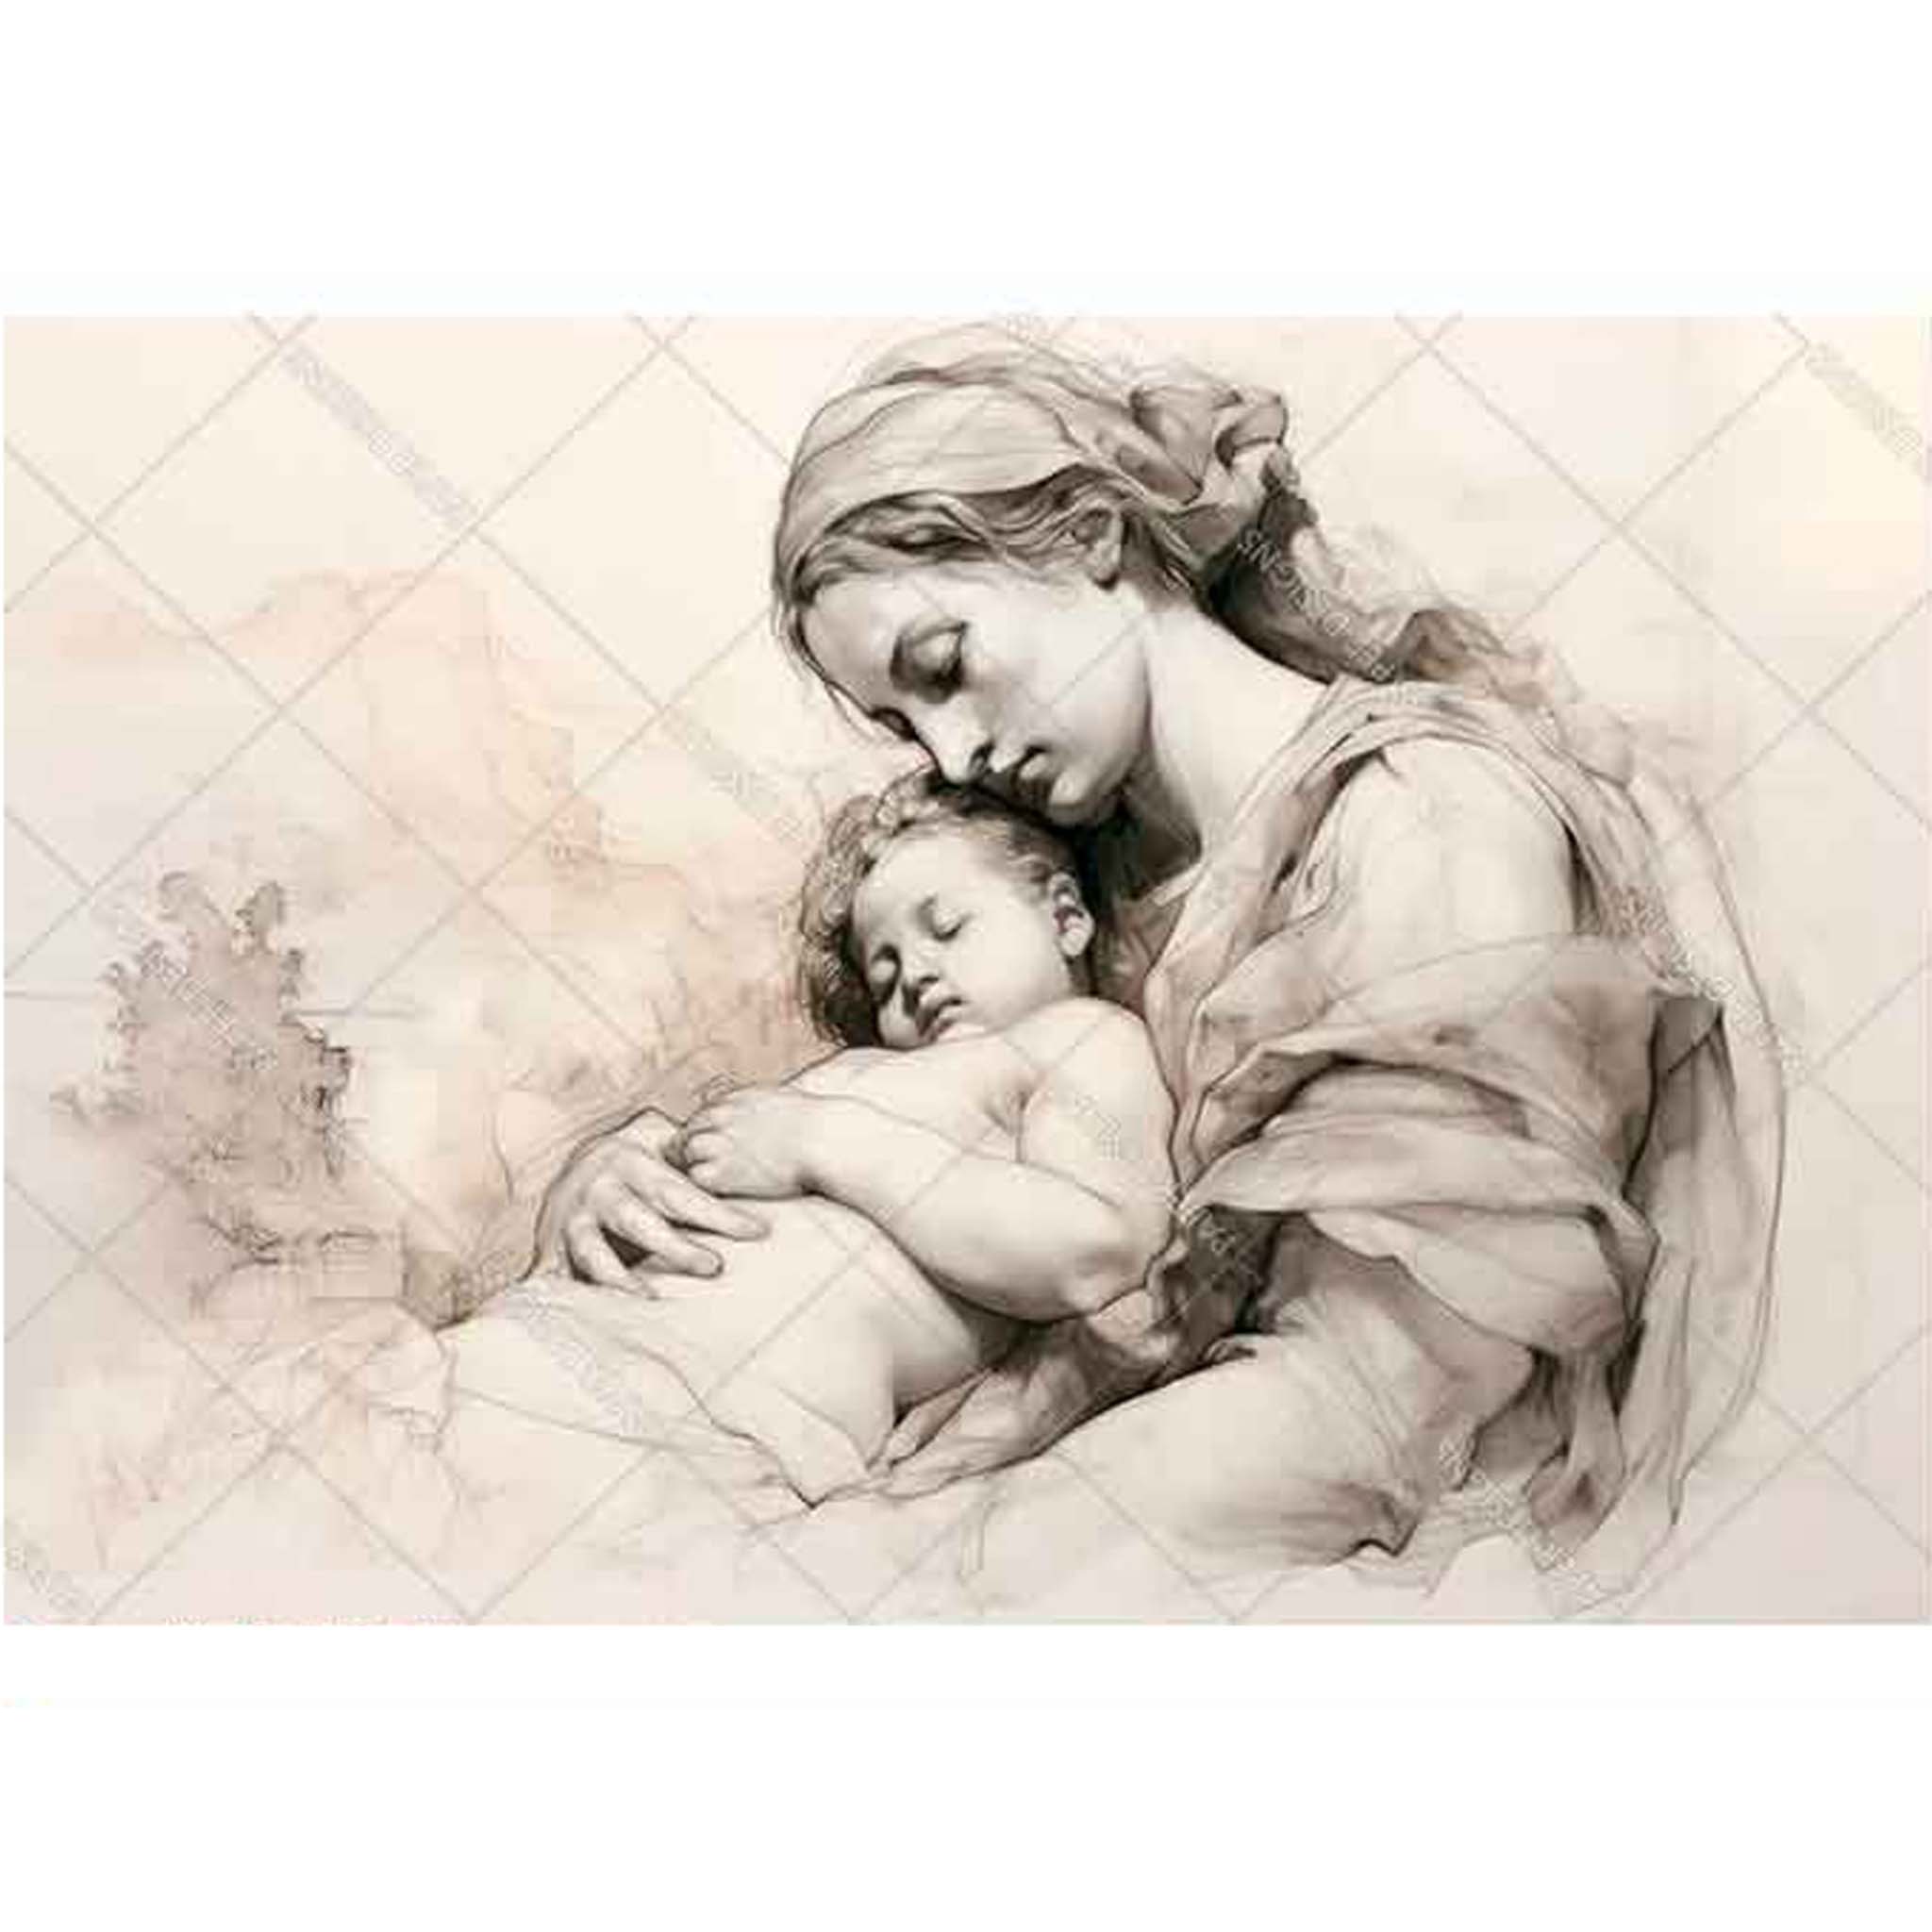 A4 rice paper design featuring a stunning pencil drawing of Mary holding a sleeping baby, sharing a tender moment. White border are on the top and bottom.